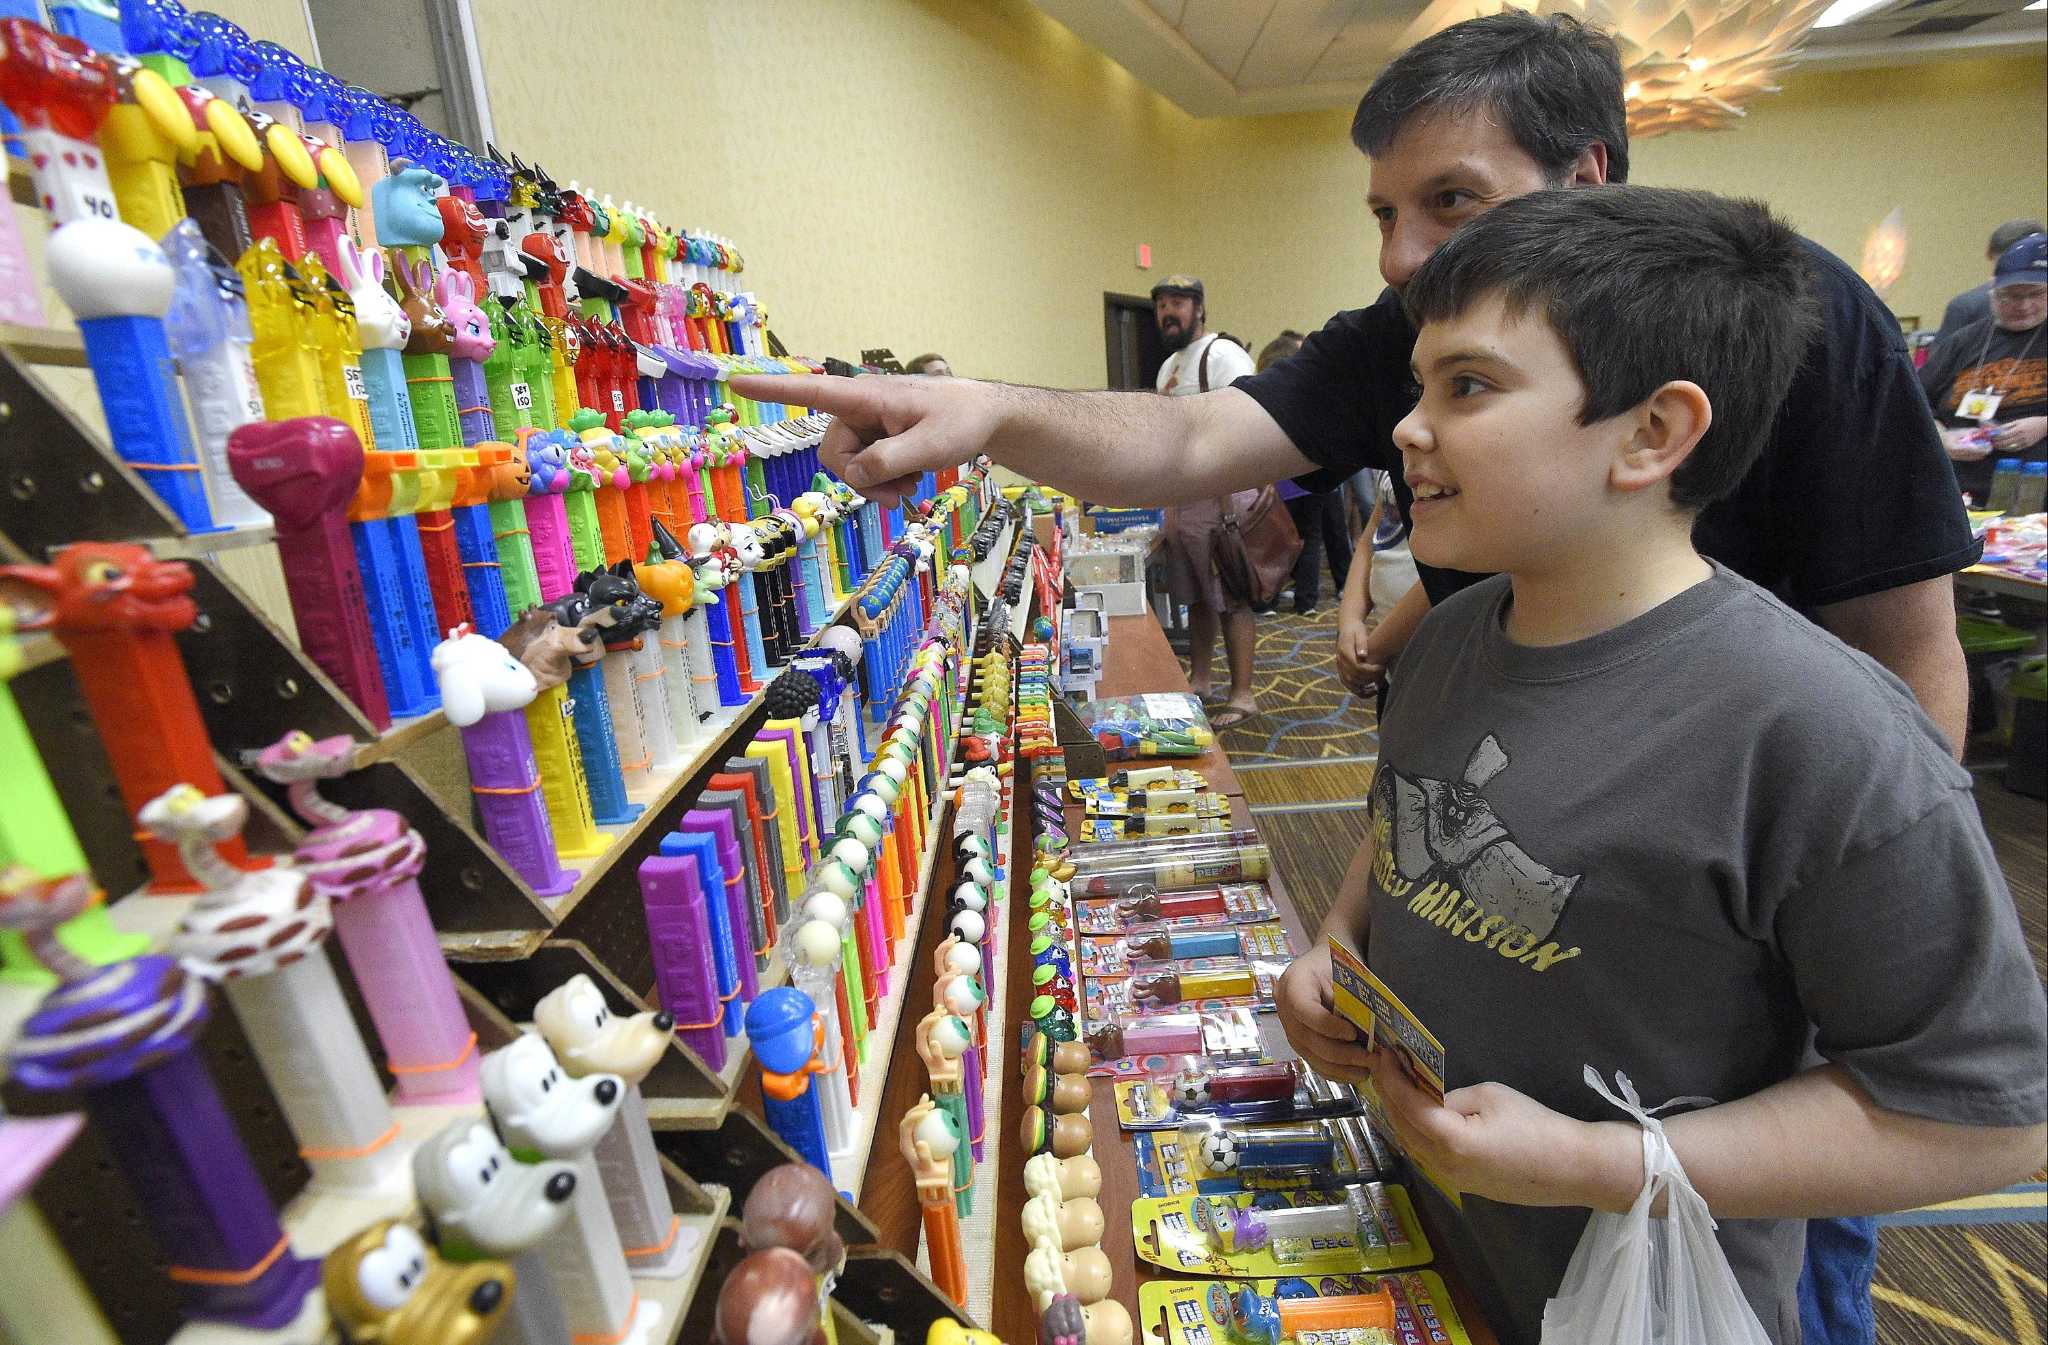 Annual Pez convention returns to Stamford